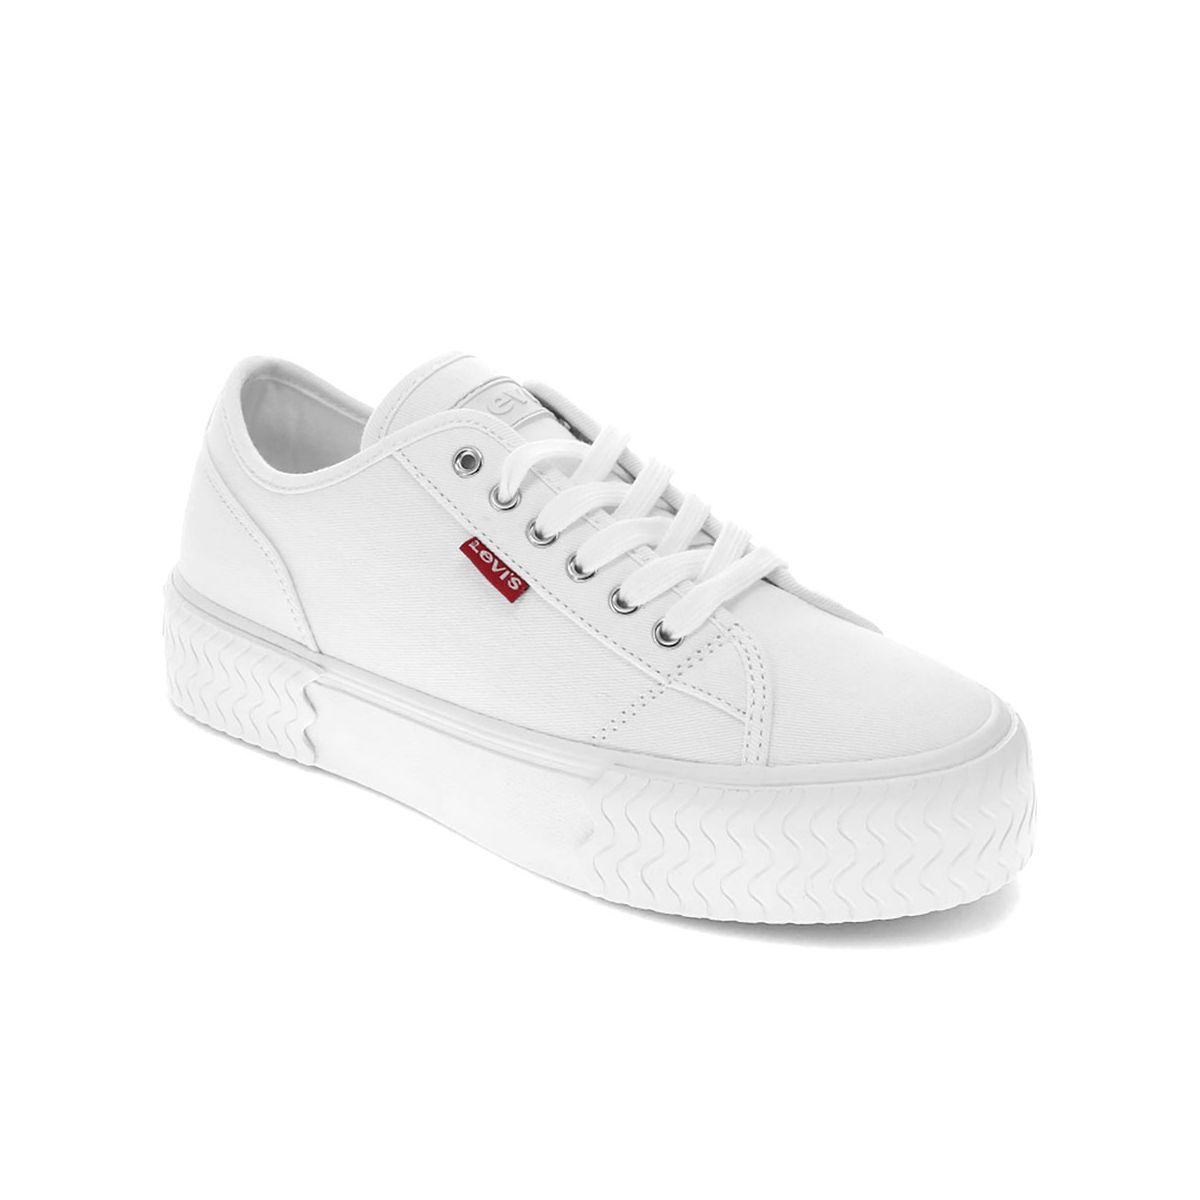 Levi's Womens Mdrn Lo Stacked Canvas Textured Casual Platform Sneaker Shoe | Target